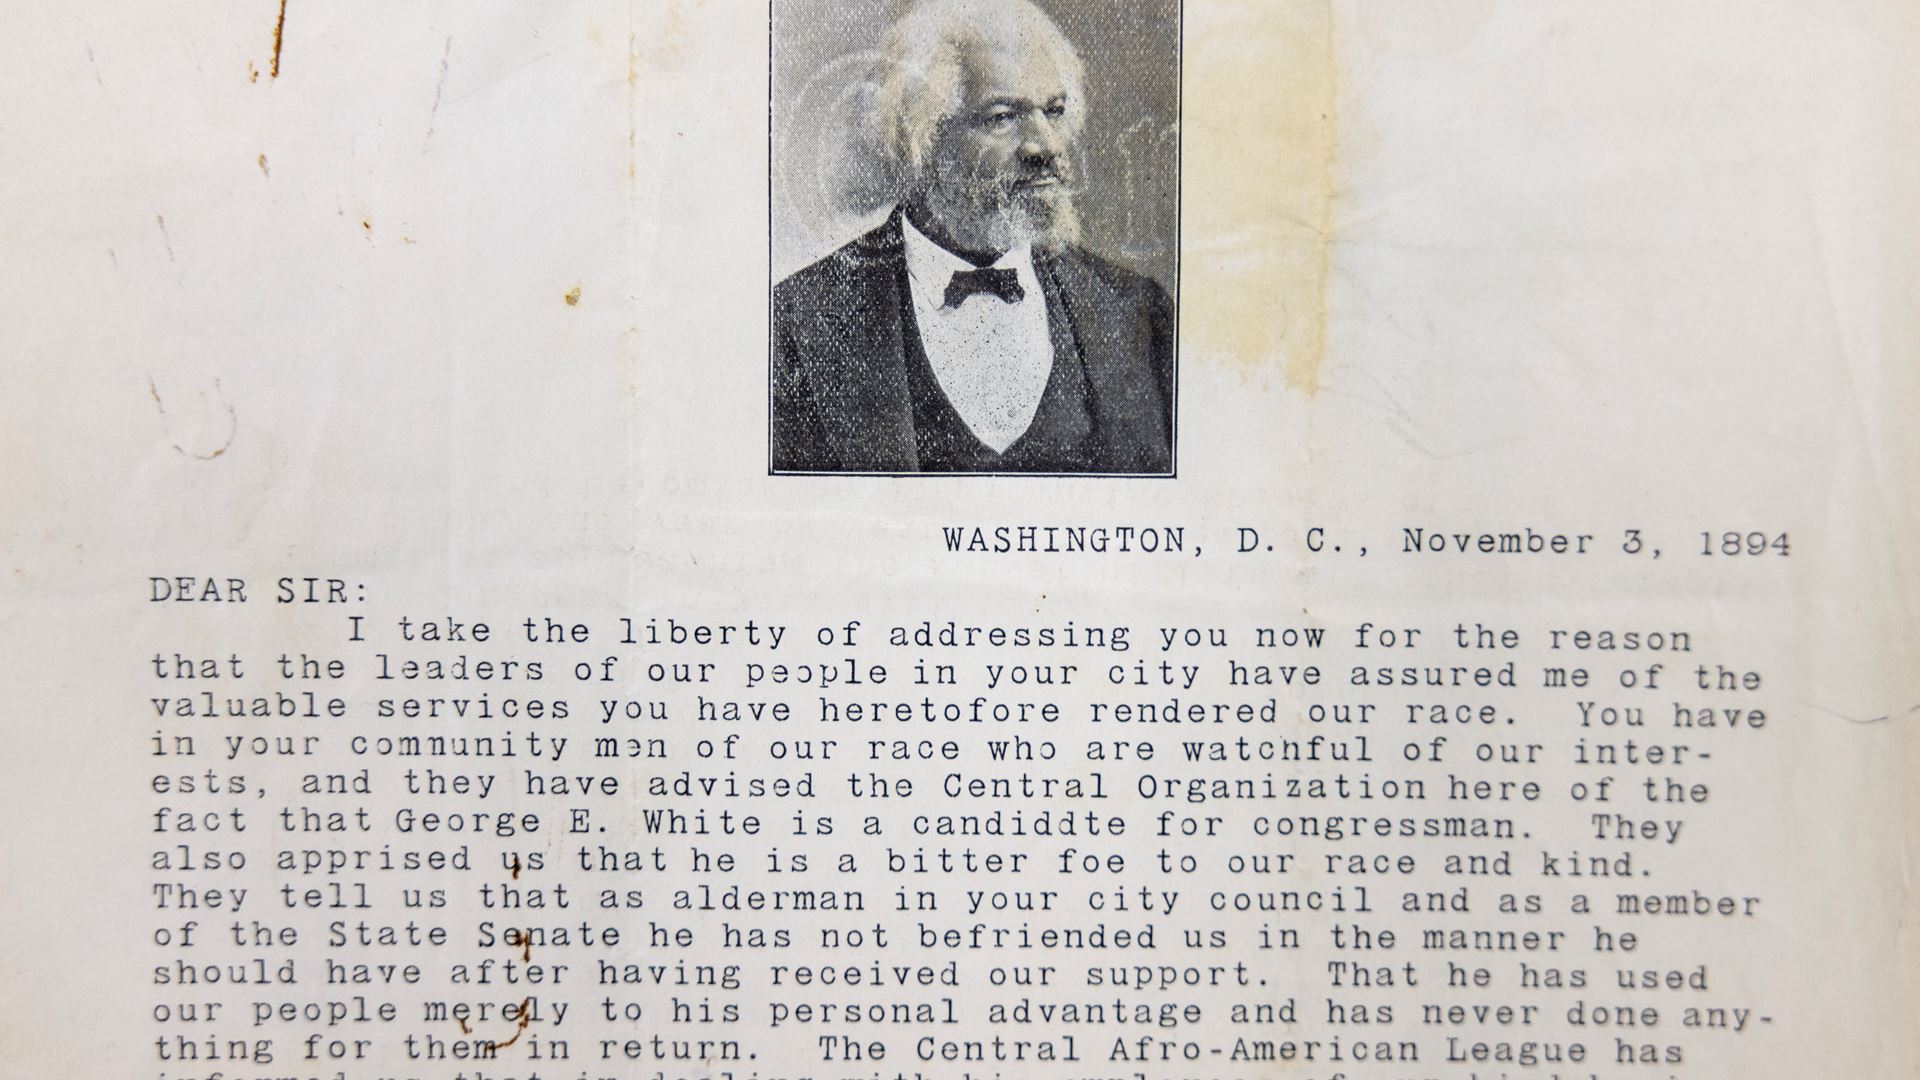 Items from the Frederick Douglass Papers